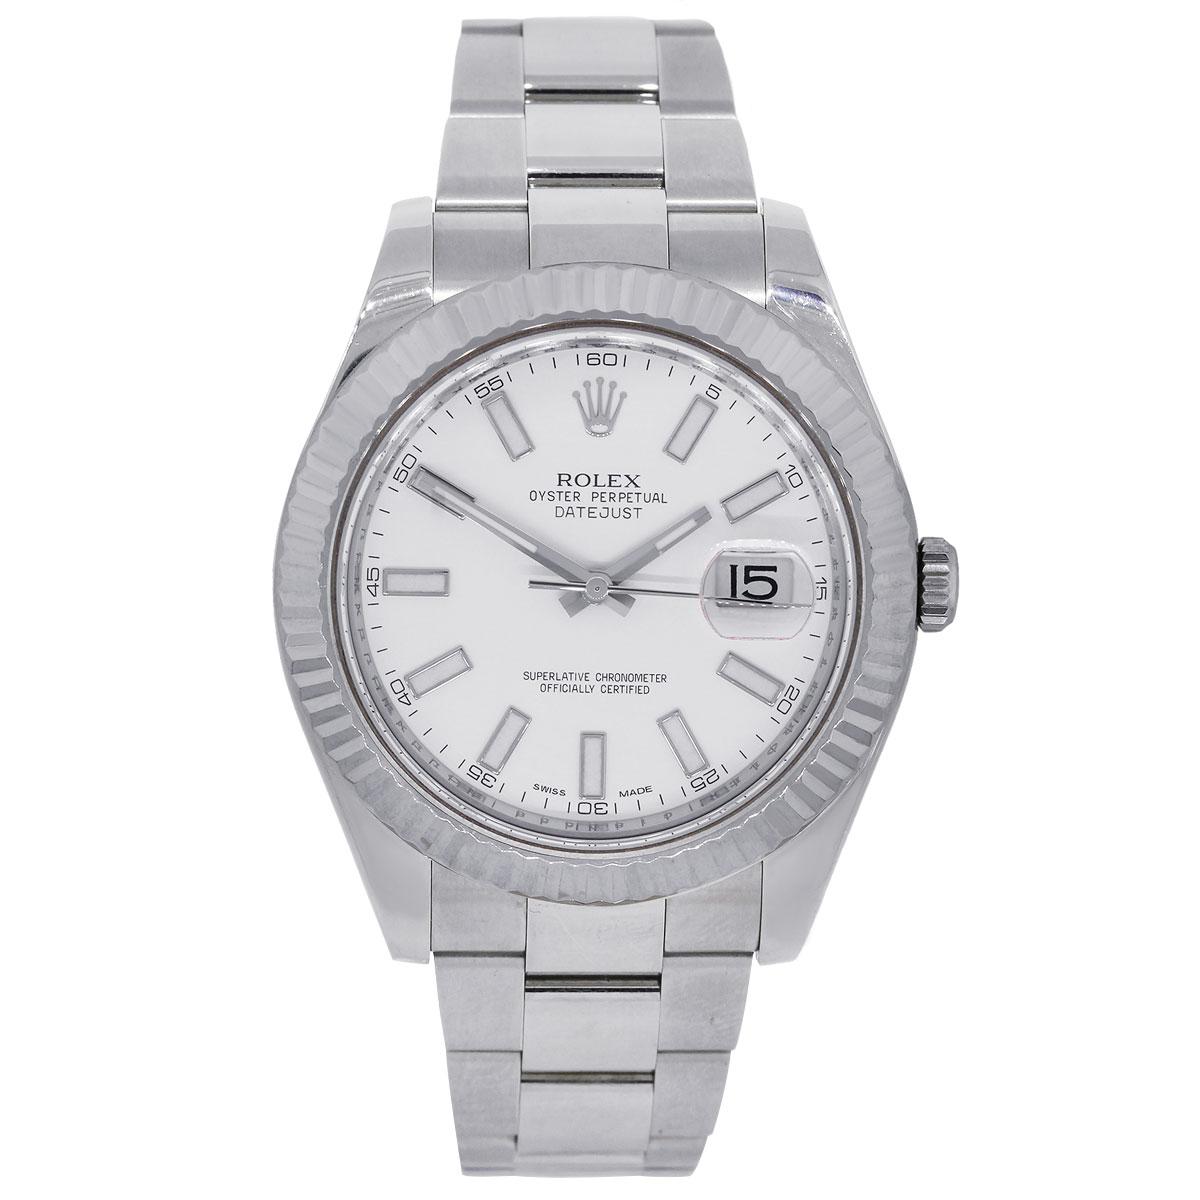 Brand: Rolex
MPN: 116334
Model: Datejust II
Case Material: Stainless Steel
Case Diameter: 41mm
Bezel: Stainless Steel Fluted bezel
Dial: White dial with luminescent hour markers and date window at the 3 o’clock position
Bracelet: Stainless steel